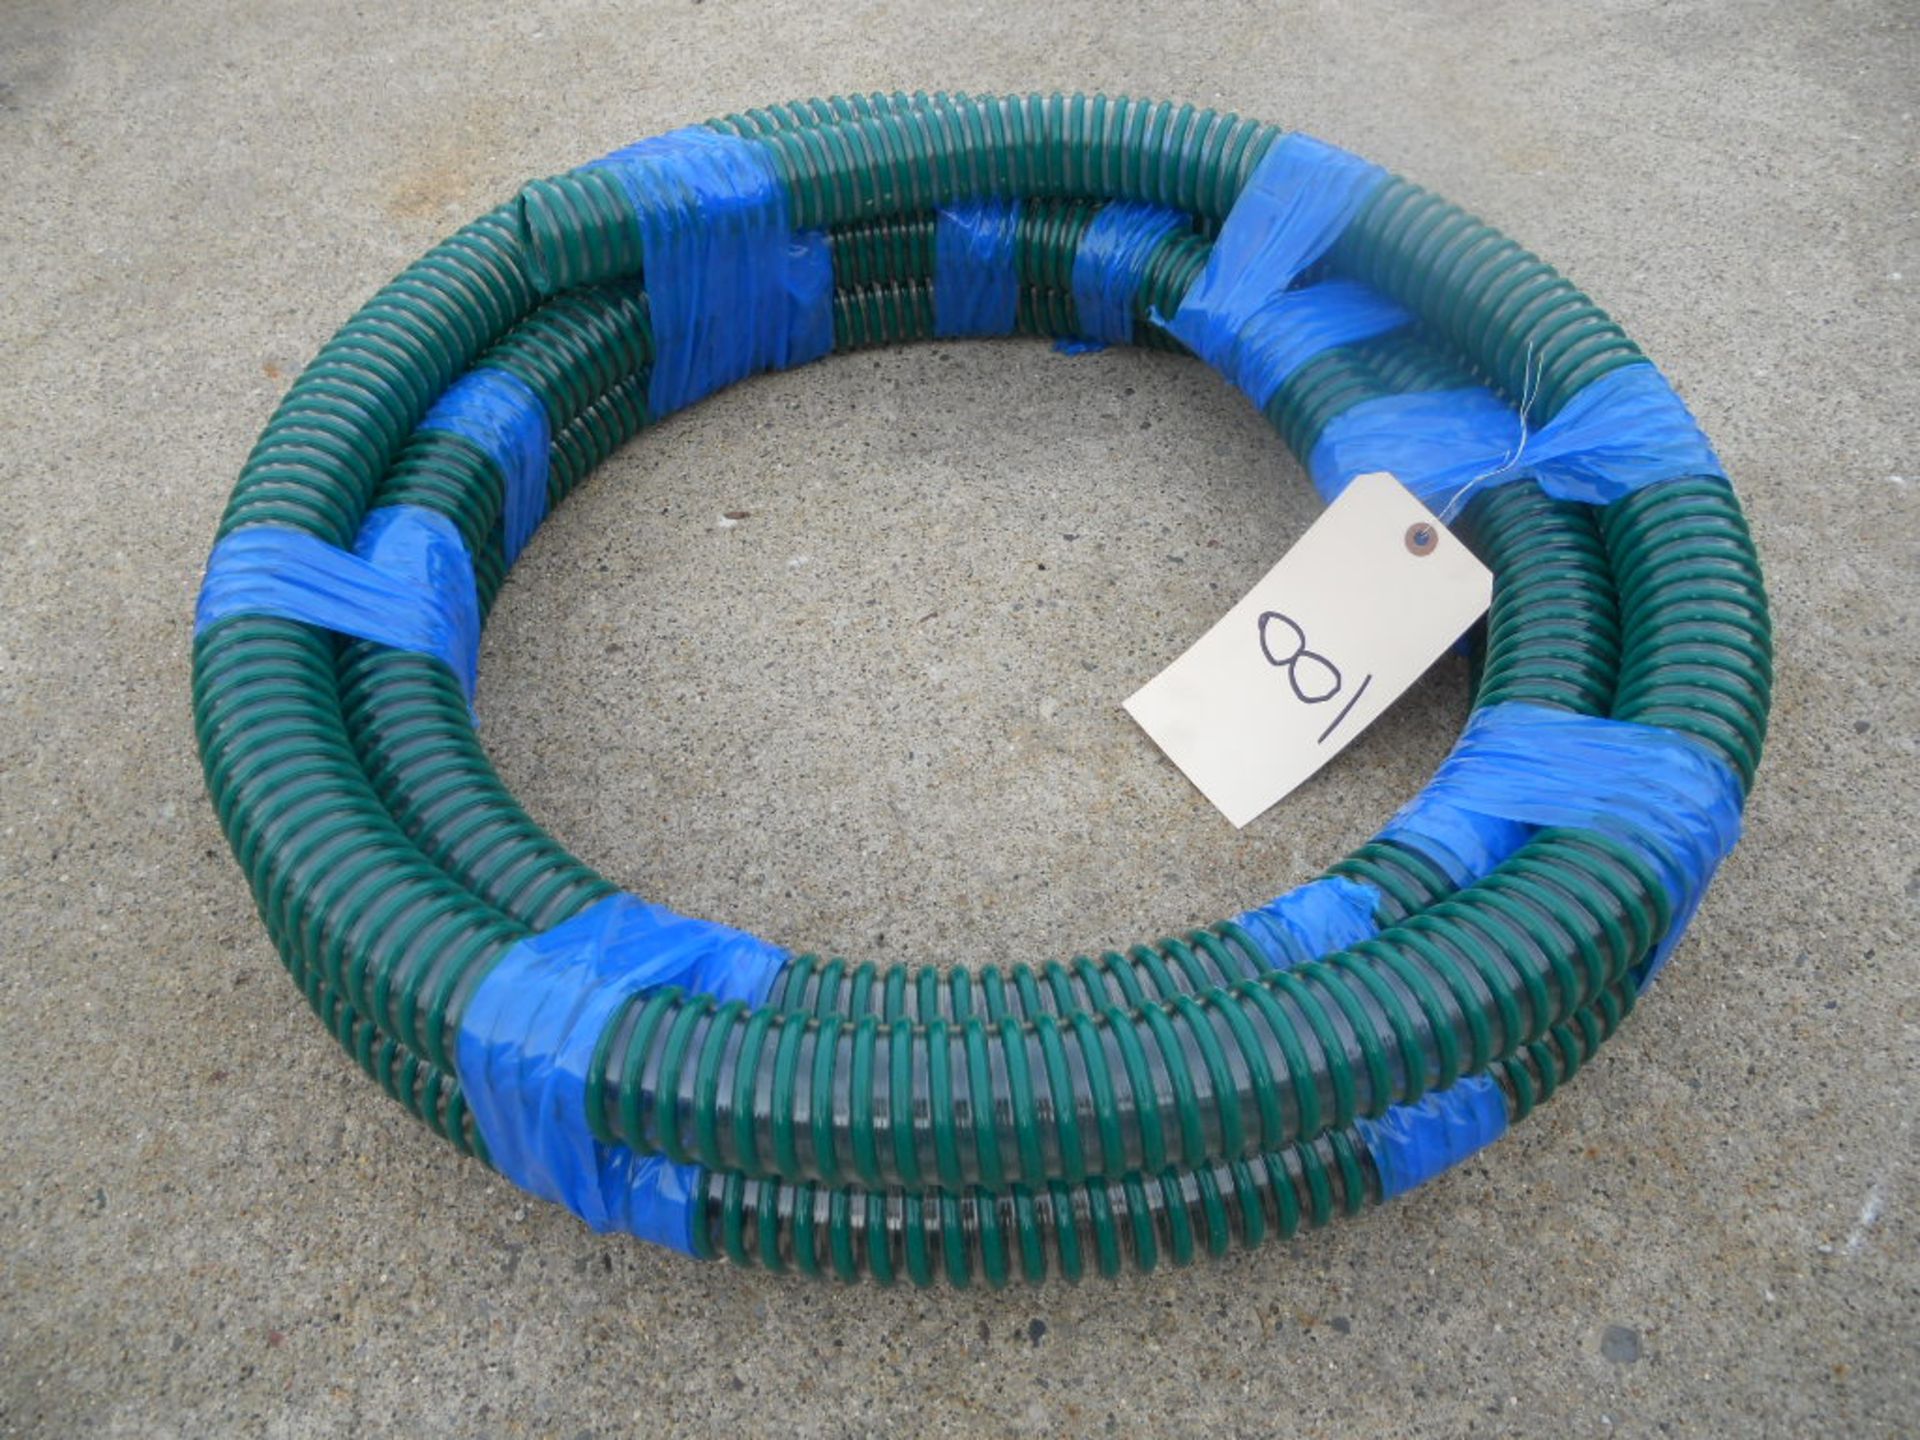 25 ft. of 1-3/4" ID Flex Aircraft Hose for Air Intake, Vacuum or Pump Water Input. New, Never Used